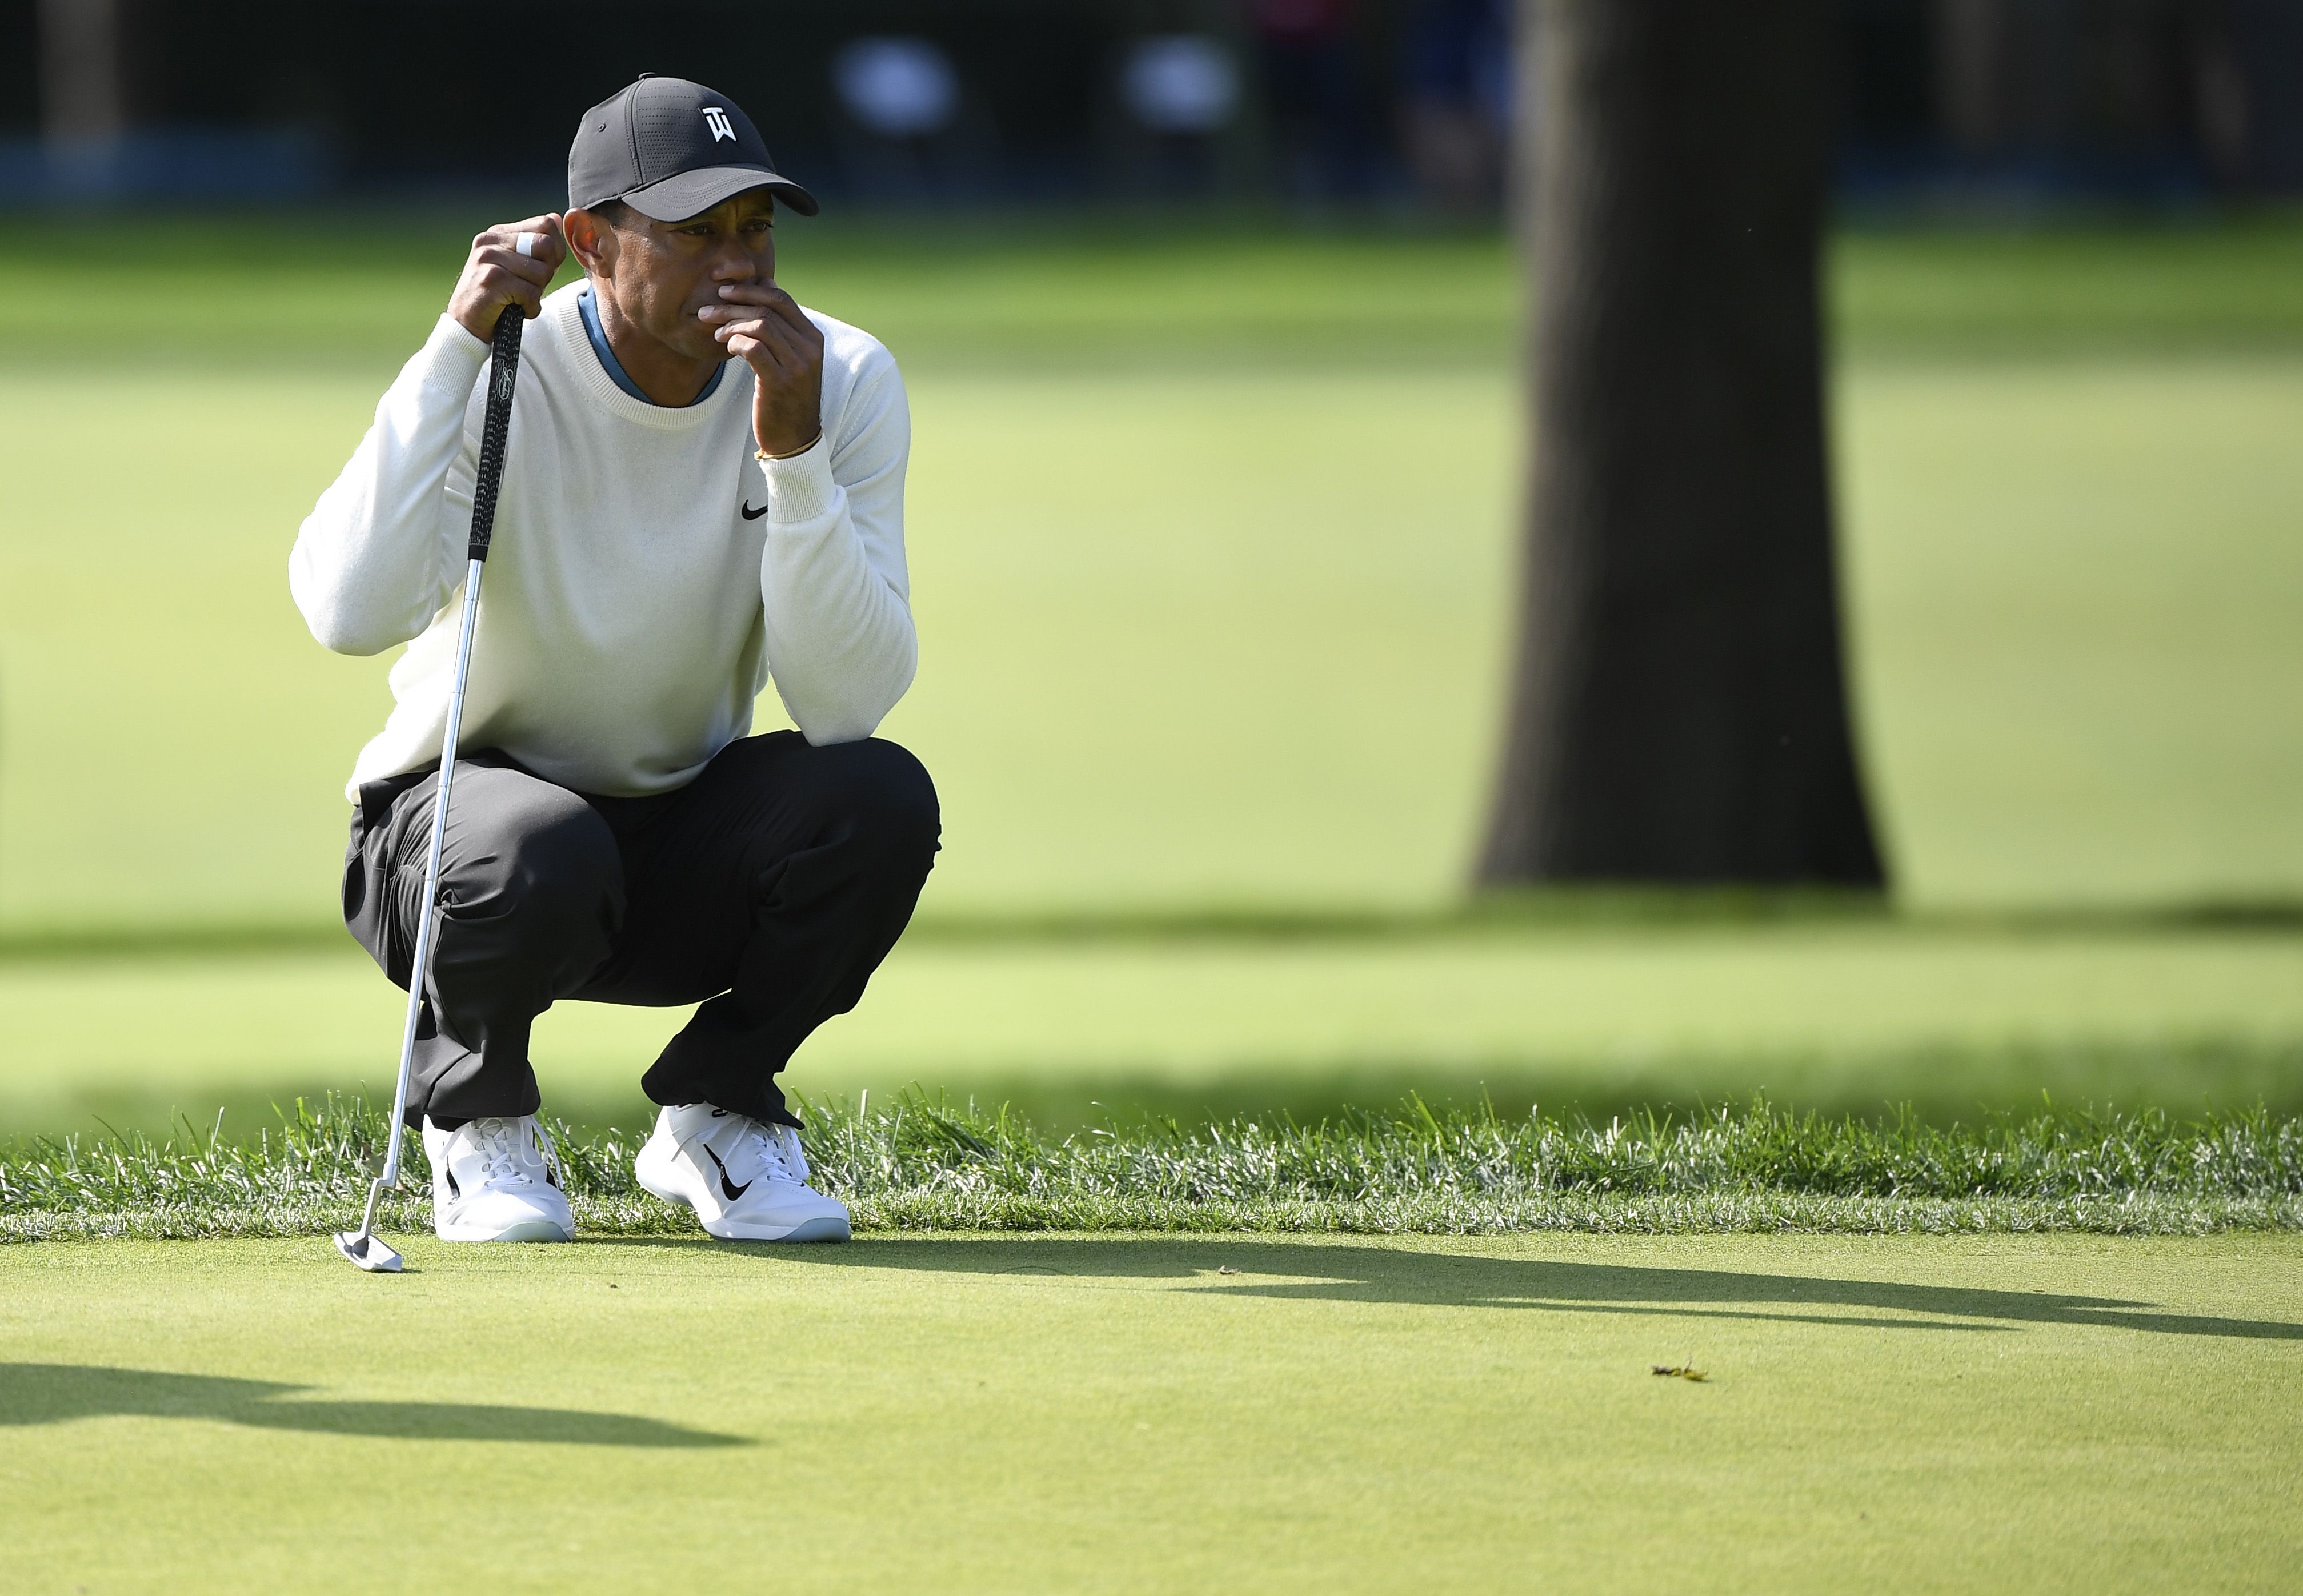 Sep 18, 2020; Mamaroneck, New York, USA; Tiger Woods looks over his putt on the 17th green during the second round of the U.S. Open golf tournament at Winged Foot Golf Club - West. Mandatory Credit: Danielle Parhizkaran-USA TODAY Sports